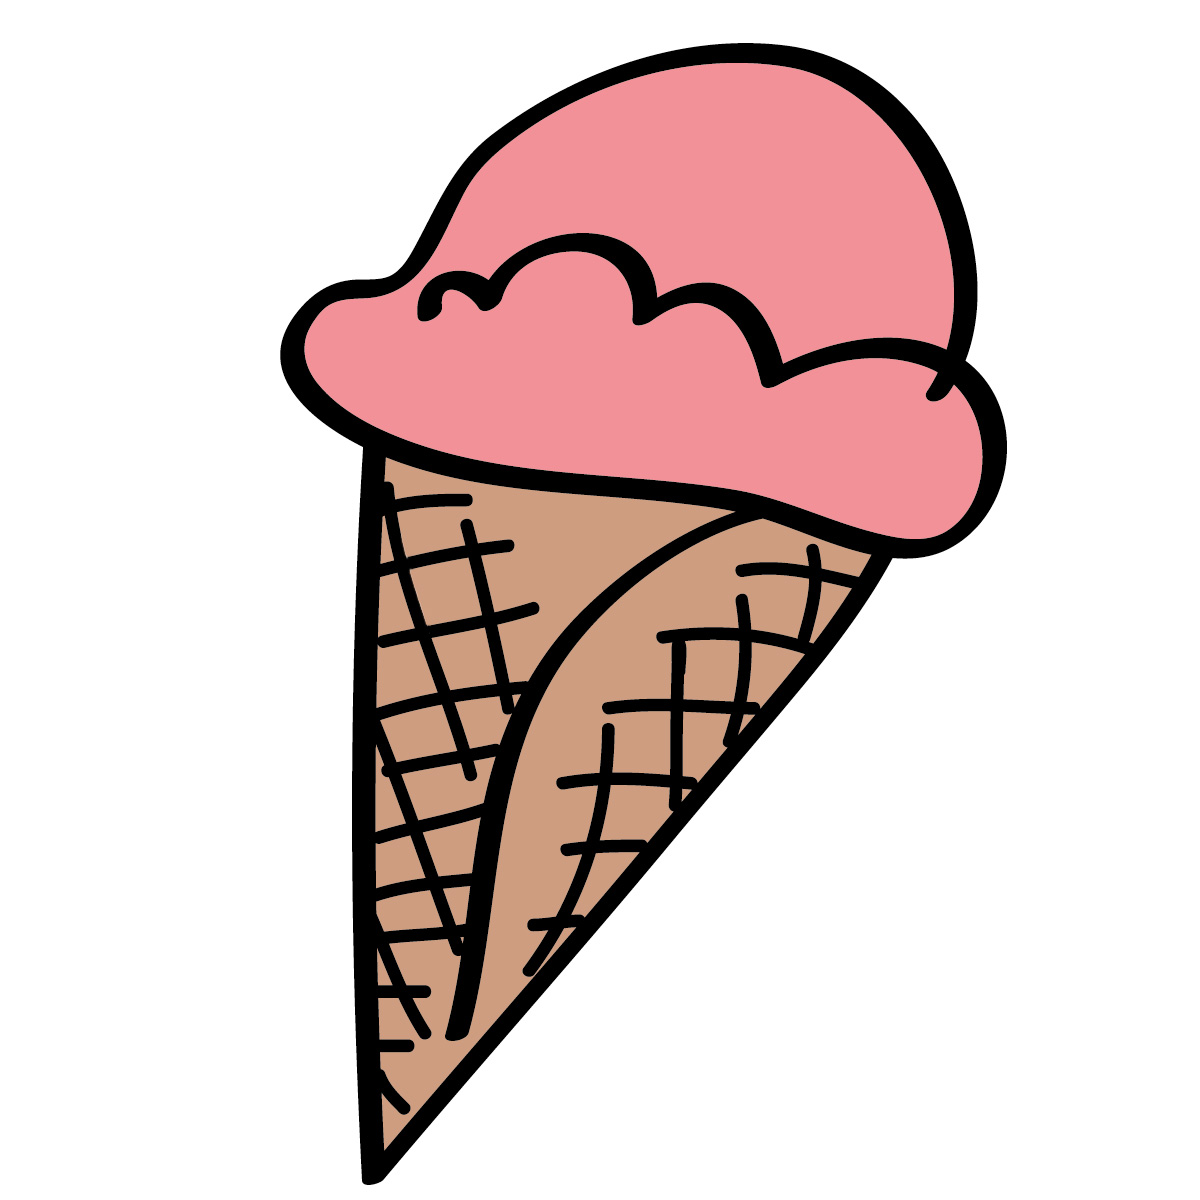 Empty Ice Cream Cone Clipart | Clipart Panda - Free Clipart Images